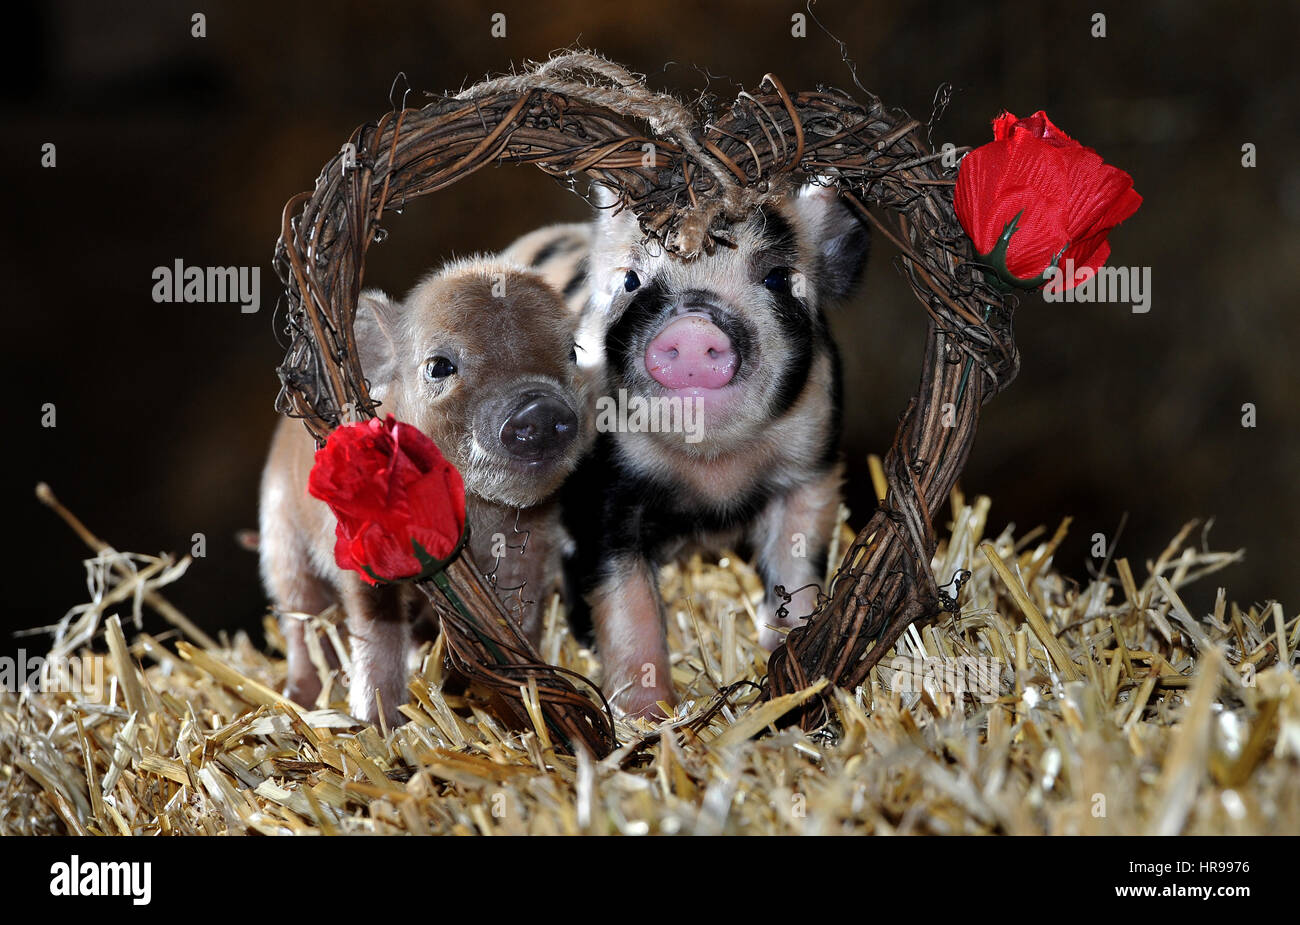 Love is in the air for St Valentine's Day at Smithills Open Farm in Bolton, Lancashire. Cute new born piglets Peppa and George cuddle up under a Valen Stock Photo